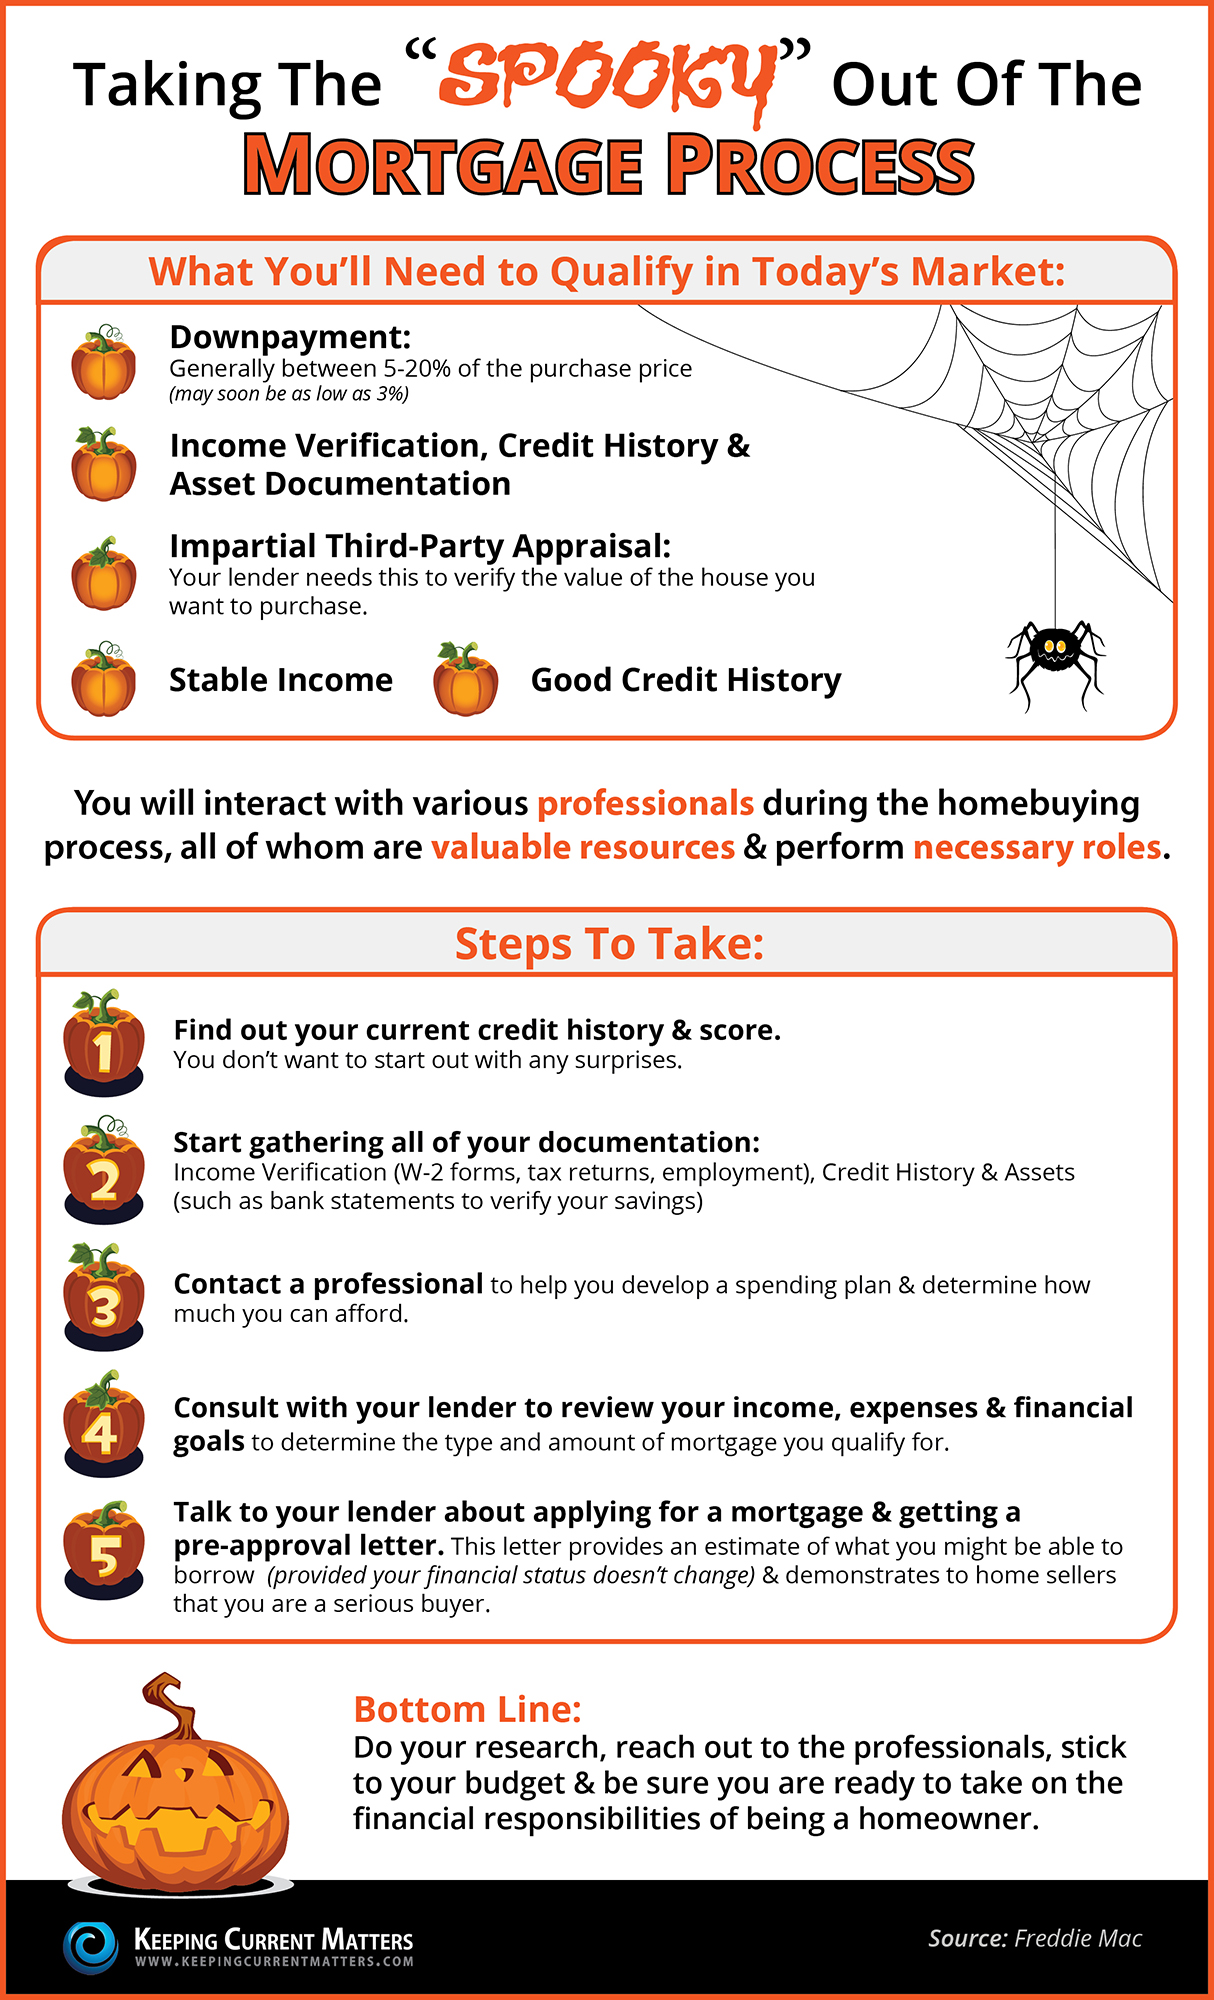 Taking the "Spooky" Out of the Mortgage Process | Keeping Current Matters